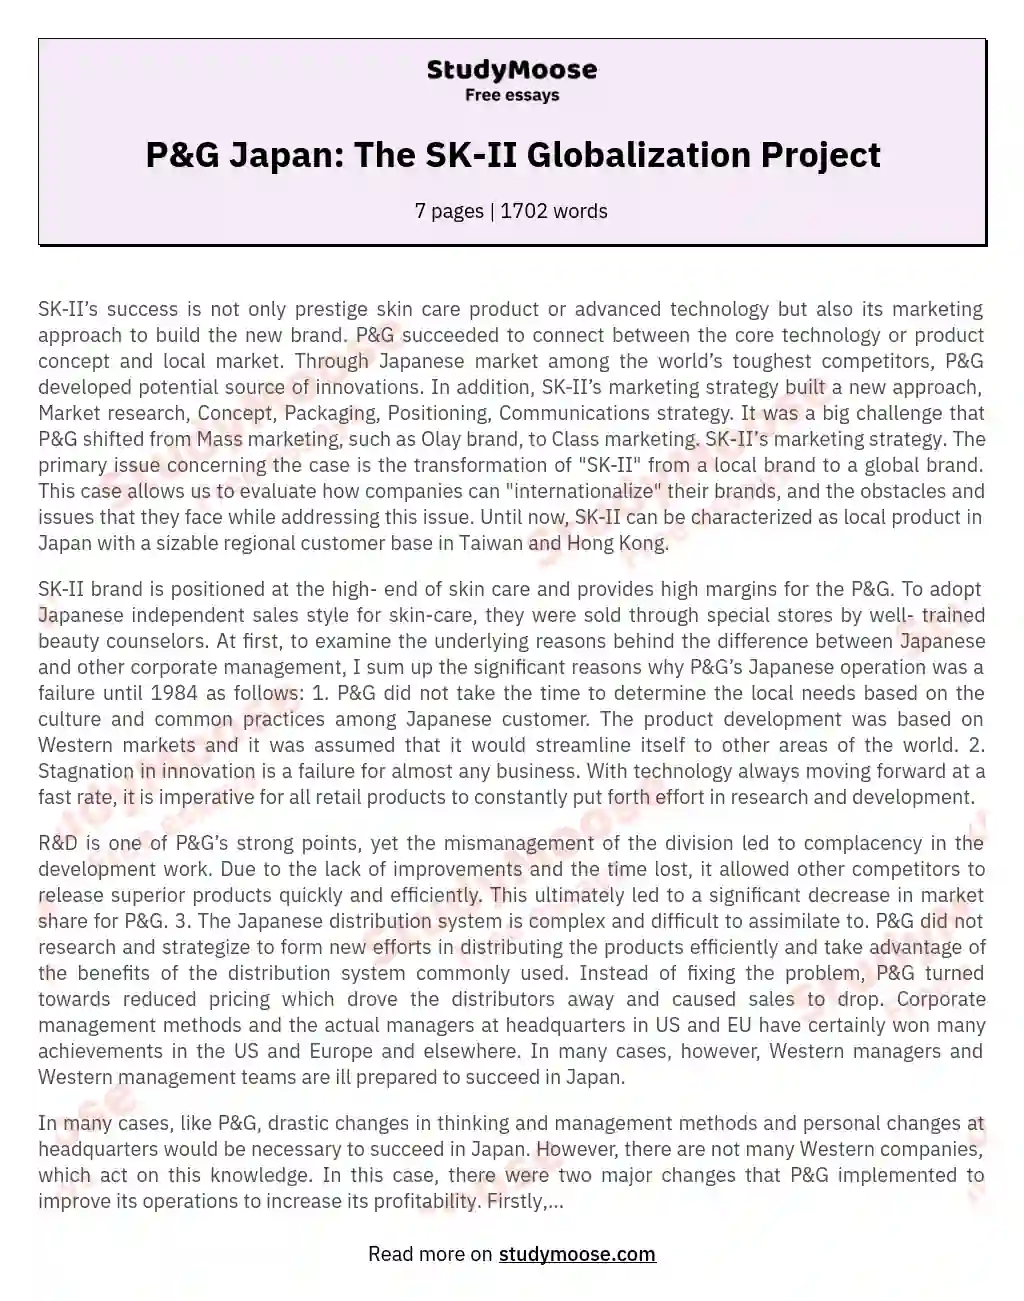 P&G Japan: The SK-II Globalization Project essay